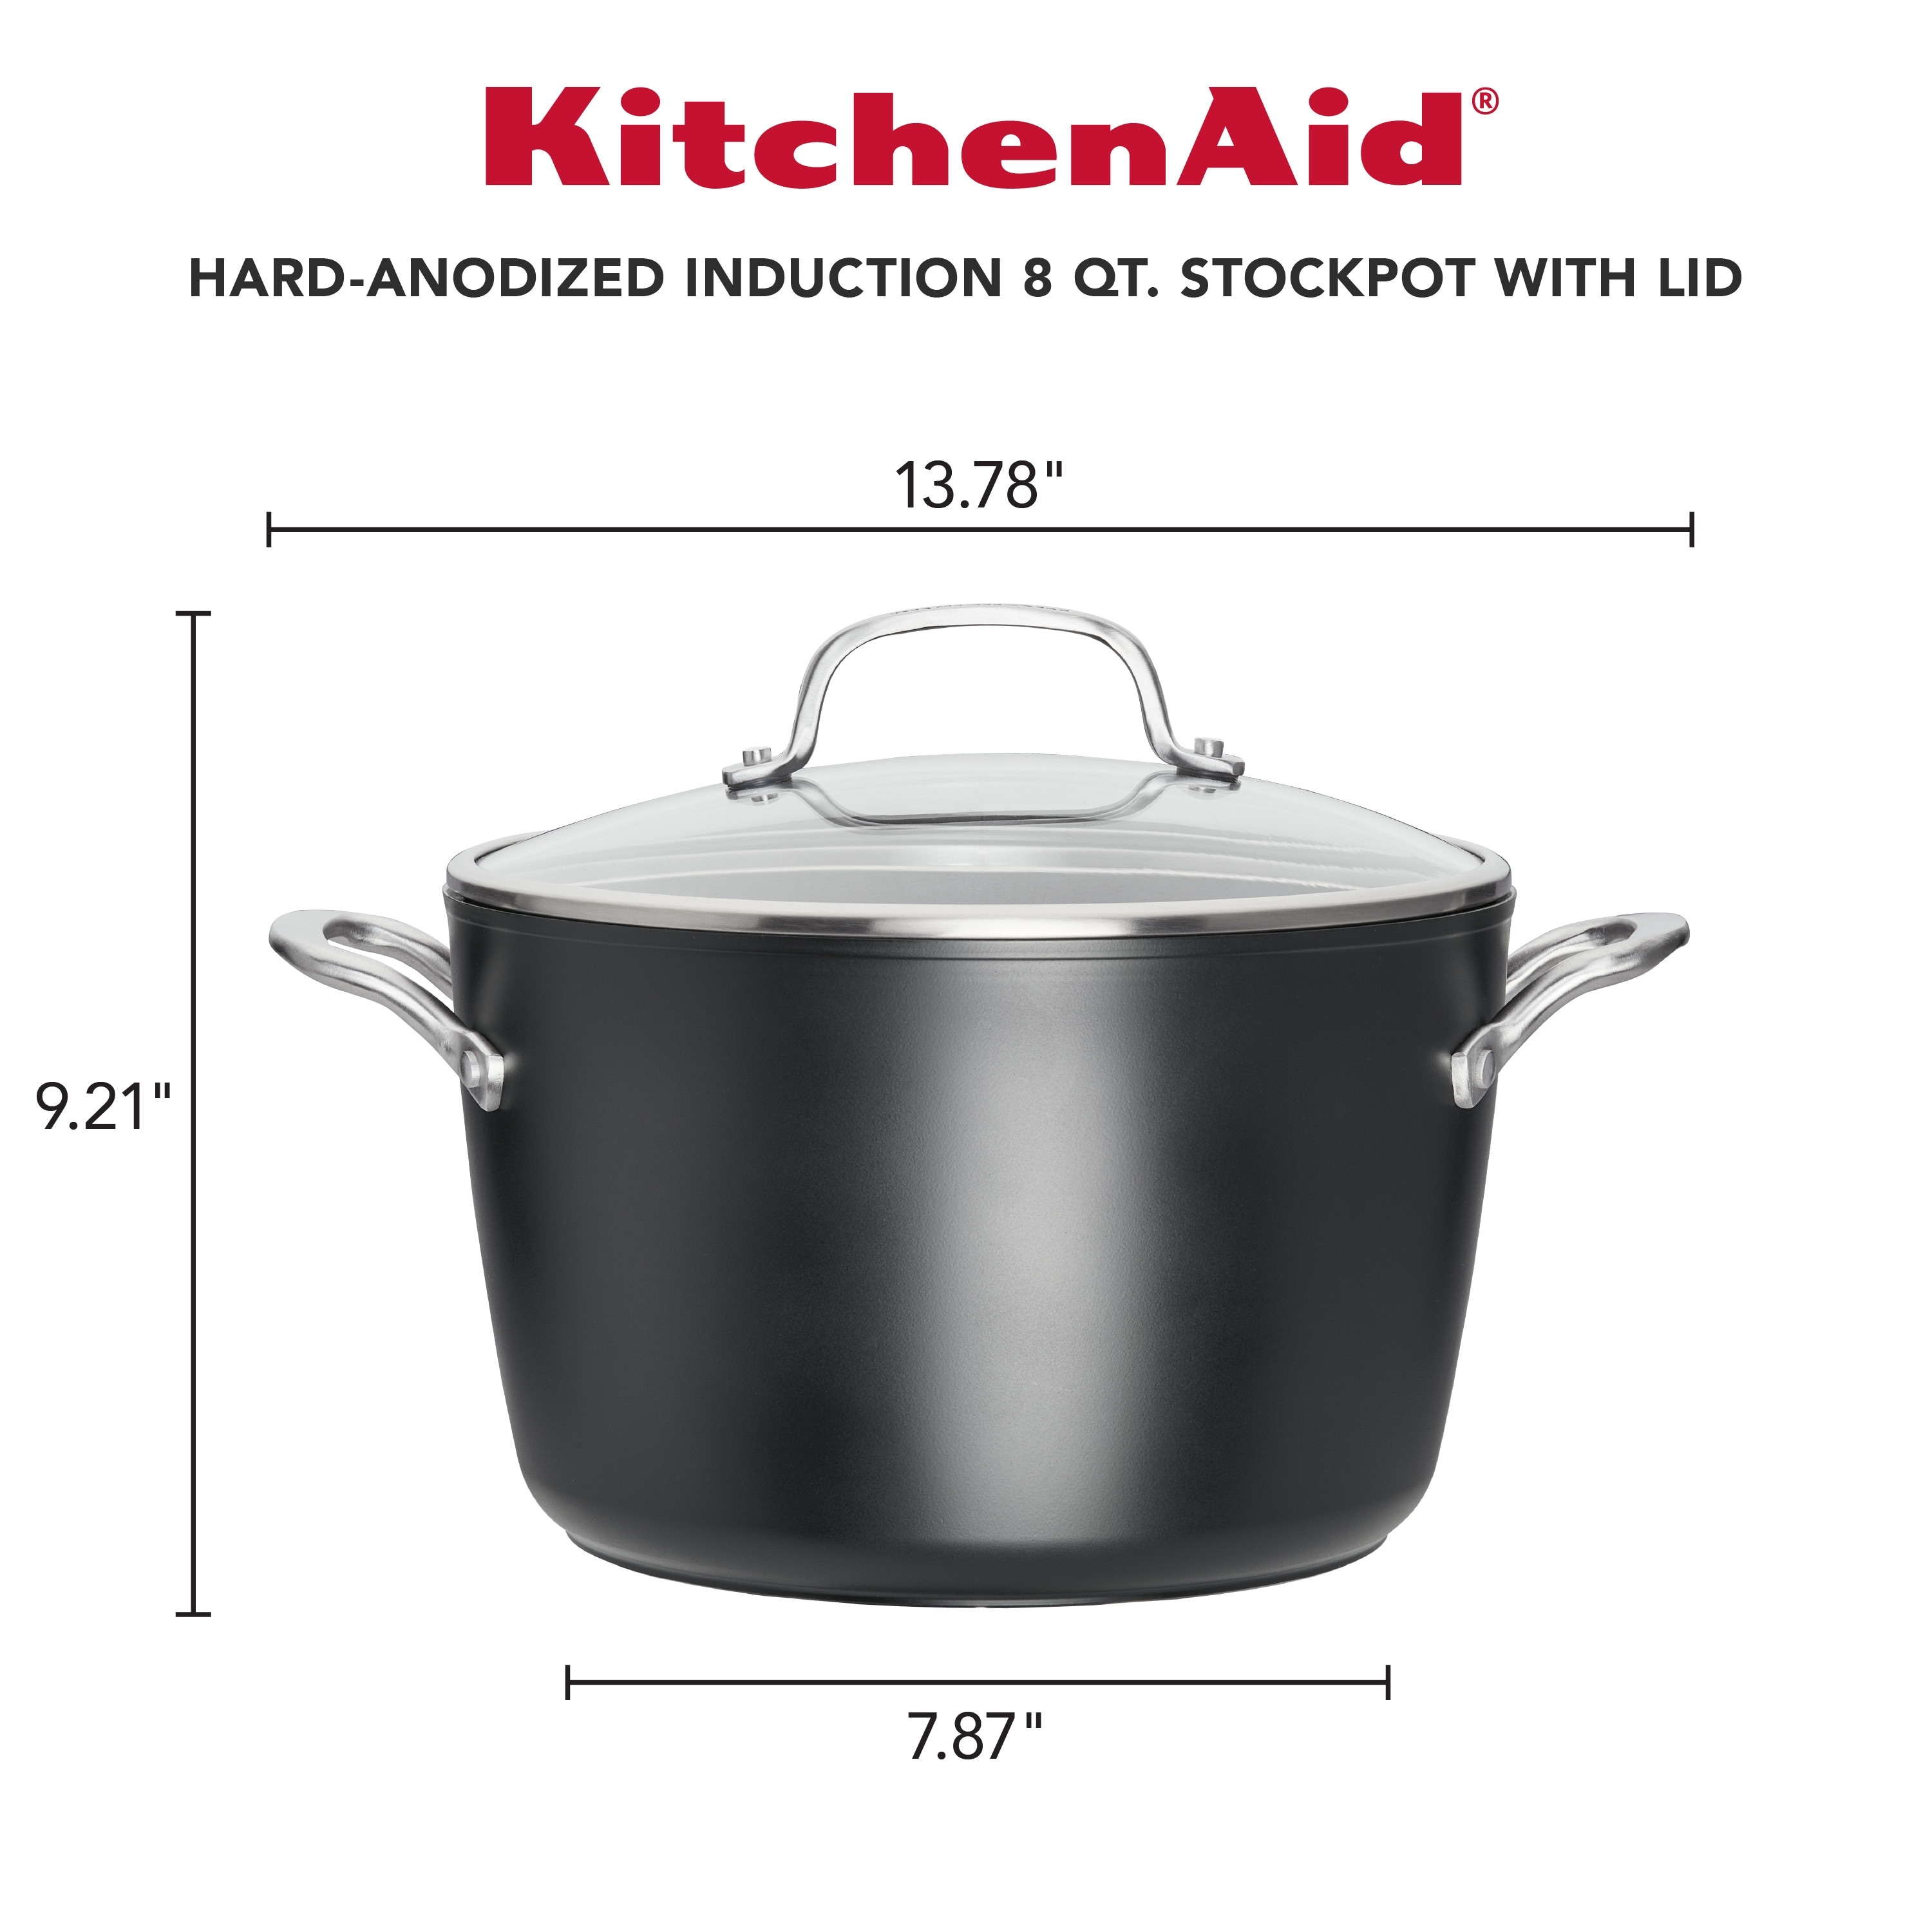 https://ak1.ostkcdn.com/images/products/is/images/direct/2f293a85f643b8dc4c8516c3c2fb19e8a651f21e/KitchenAid-Hard-Anodized-Induction-Nonstick-Stockpot-with-Lid%2C-8-Quart%2C-Matte-Black.jpg